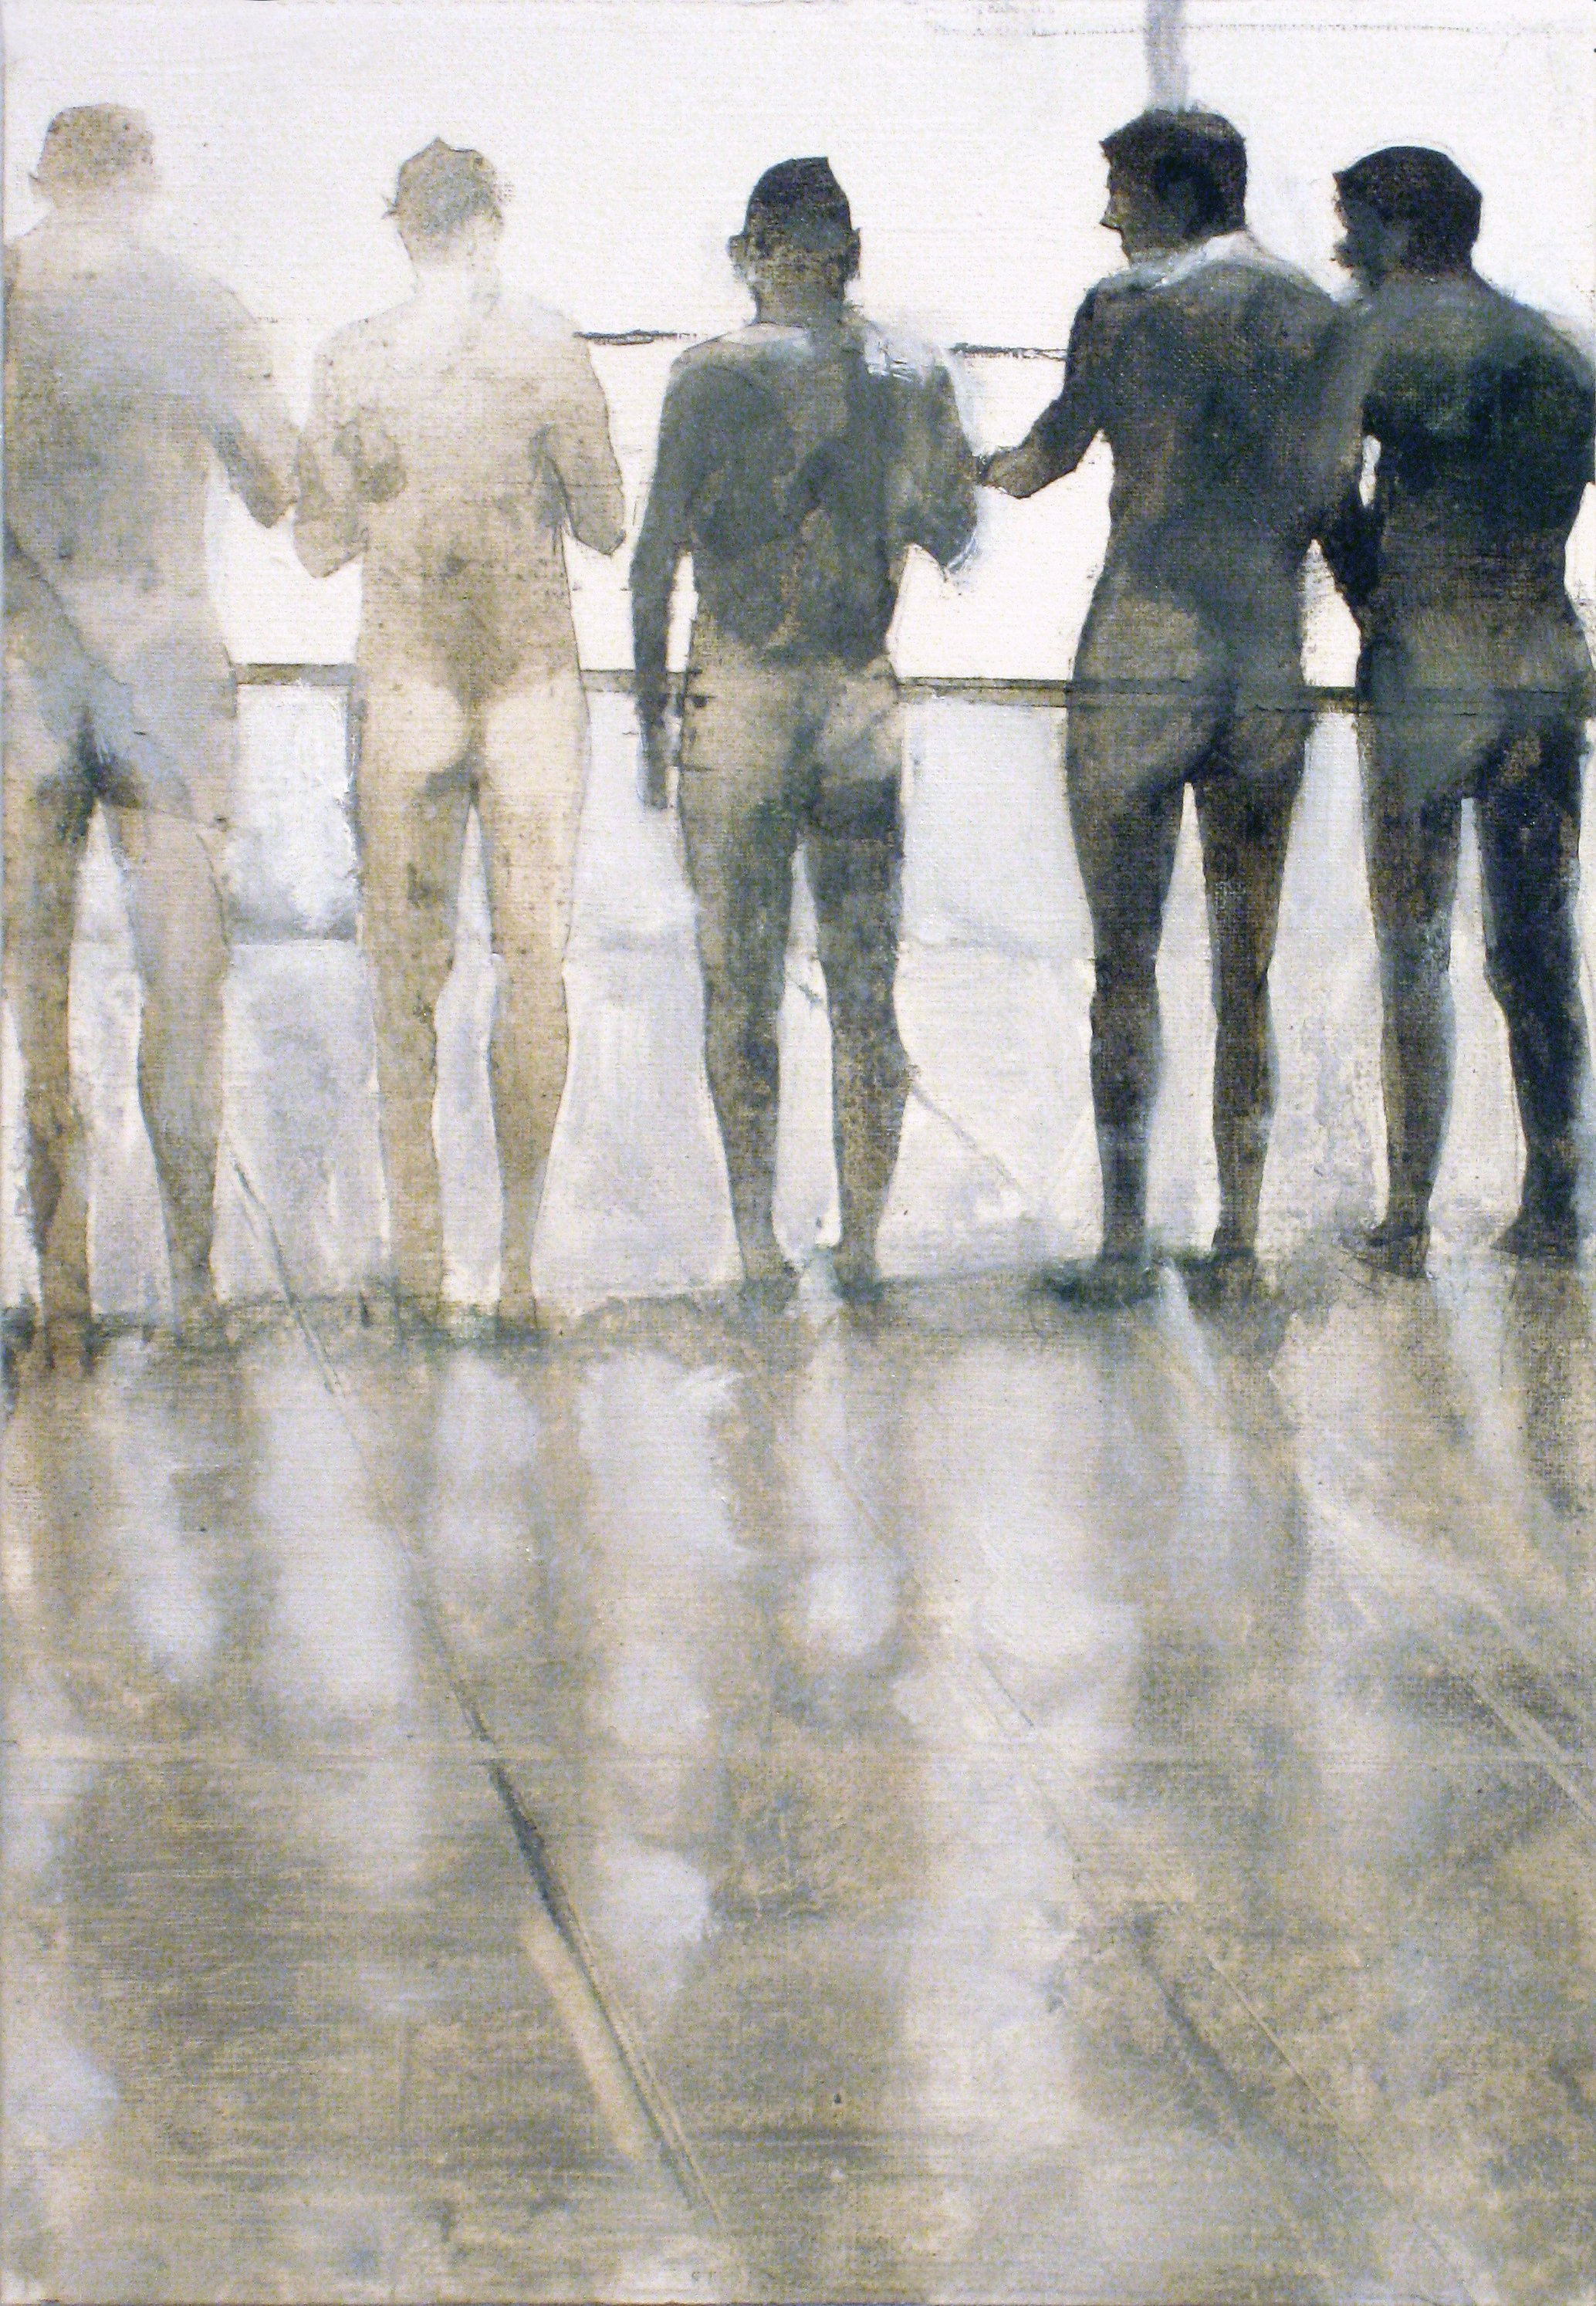  The Bathers (study 3 rev) 12x8.25 inches (30.5x21.5cm) Oil on paper 2012 